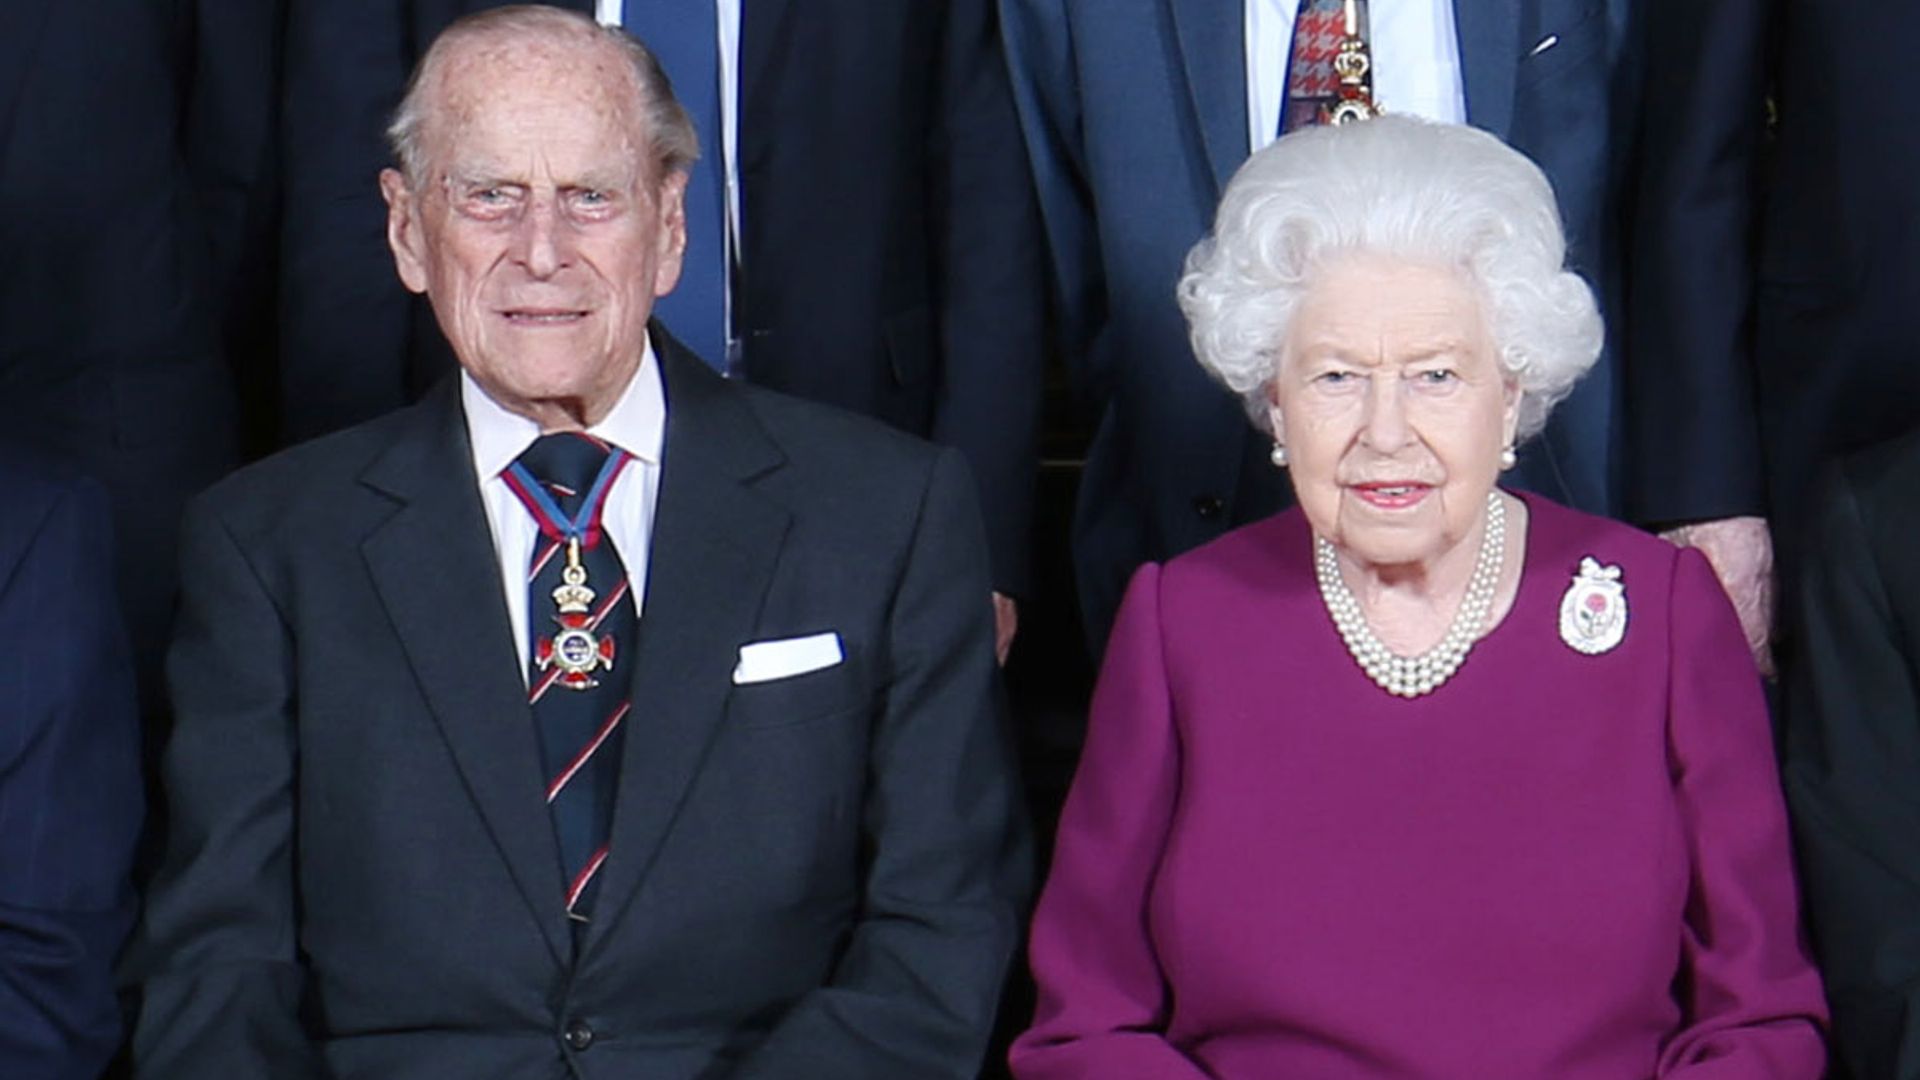 The Queen makes rare comment about royal baby on outing with Prince Philip